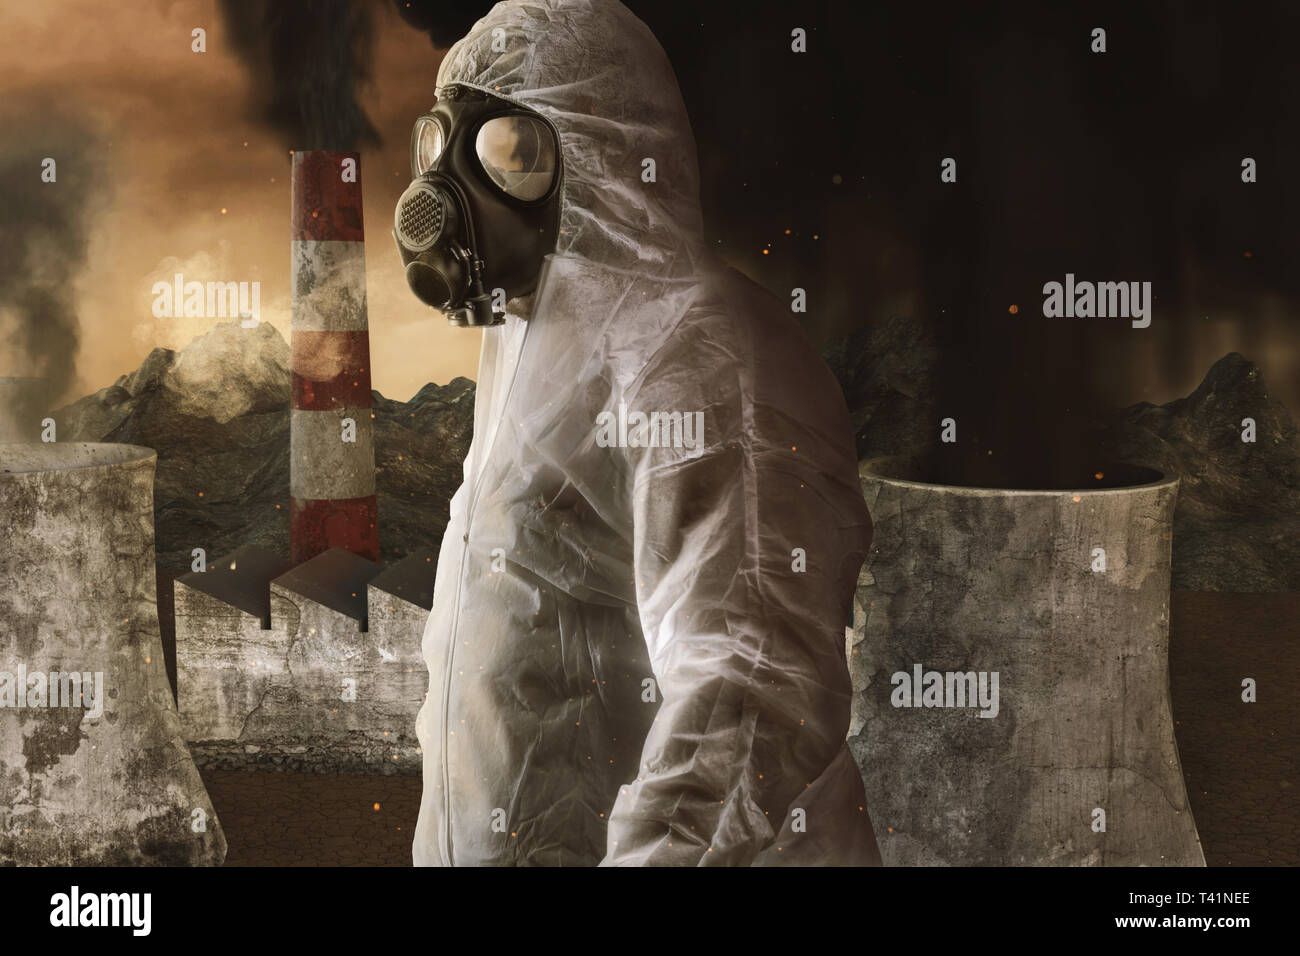 survivor with white overall and gas mask in front of incineration plant and apocalyptic environment Stock Photo